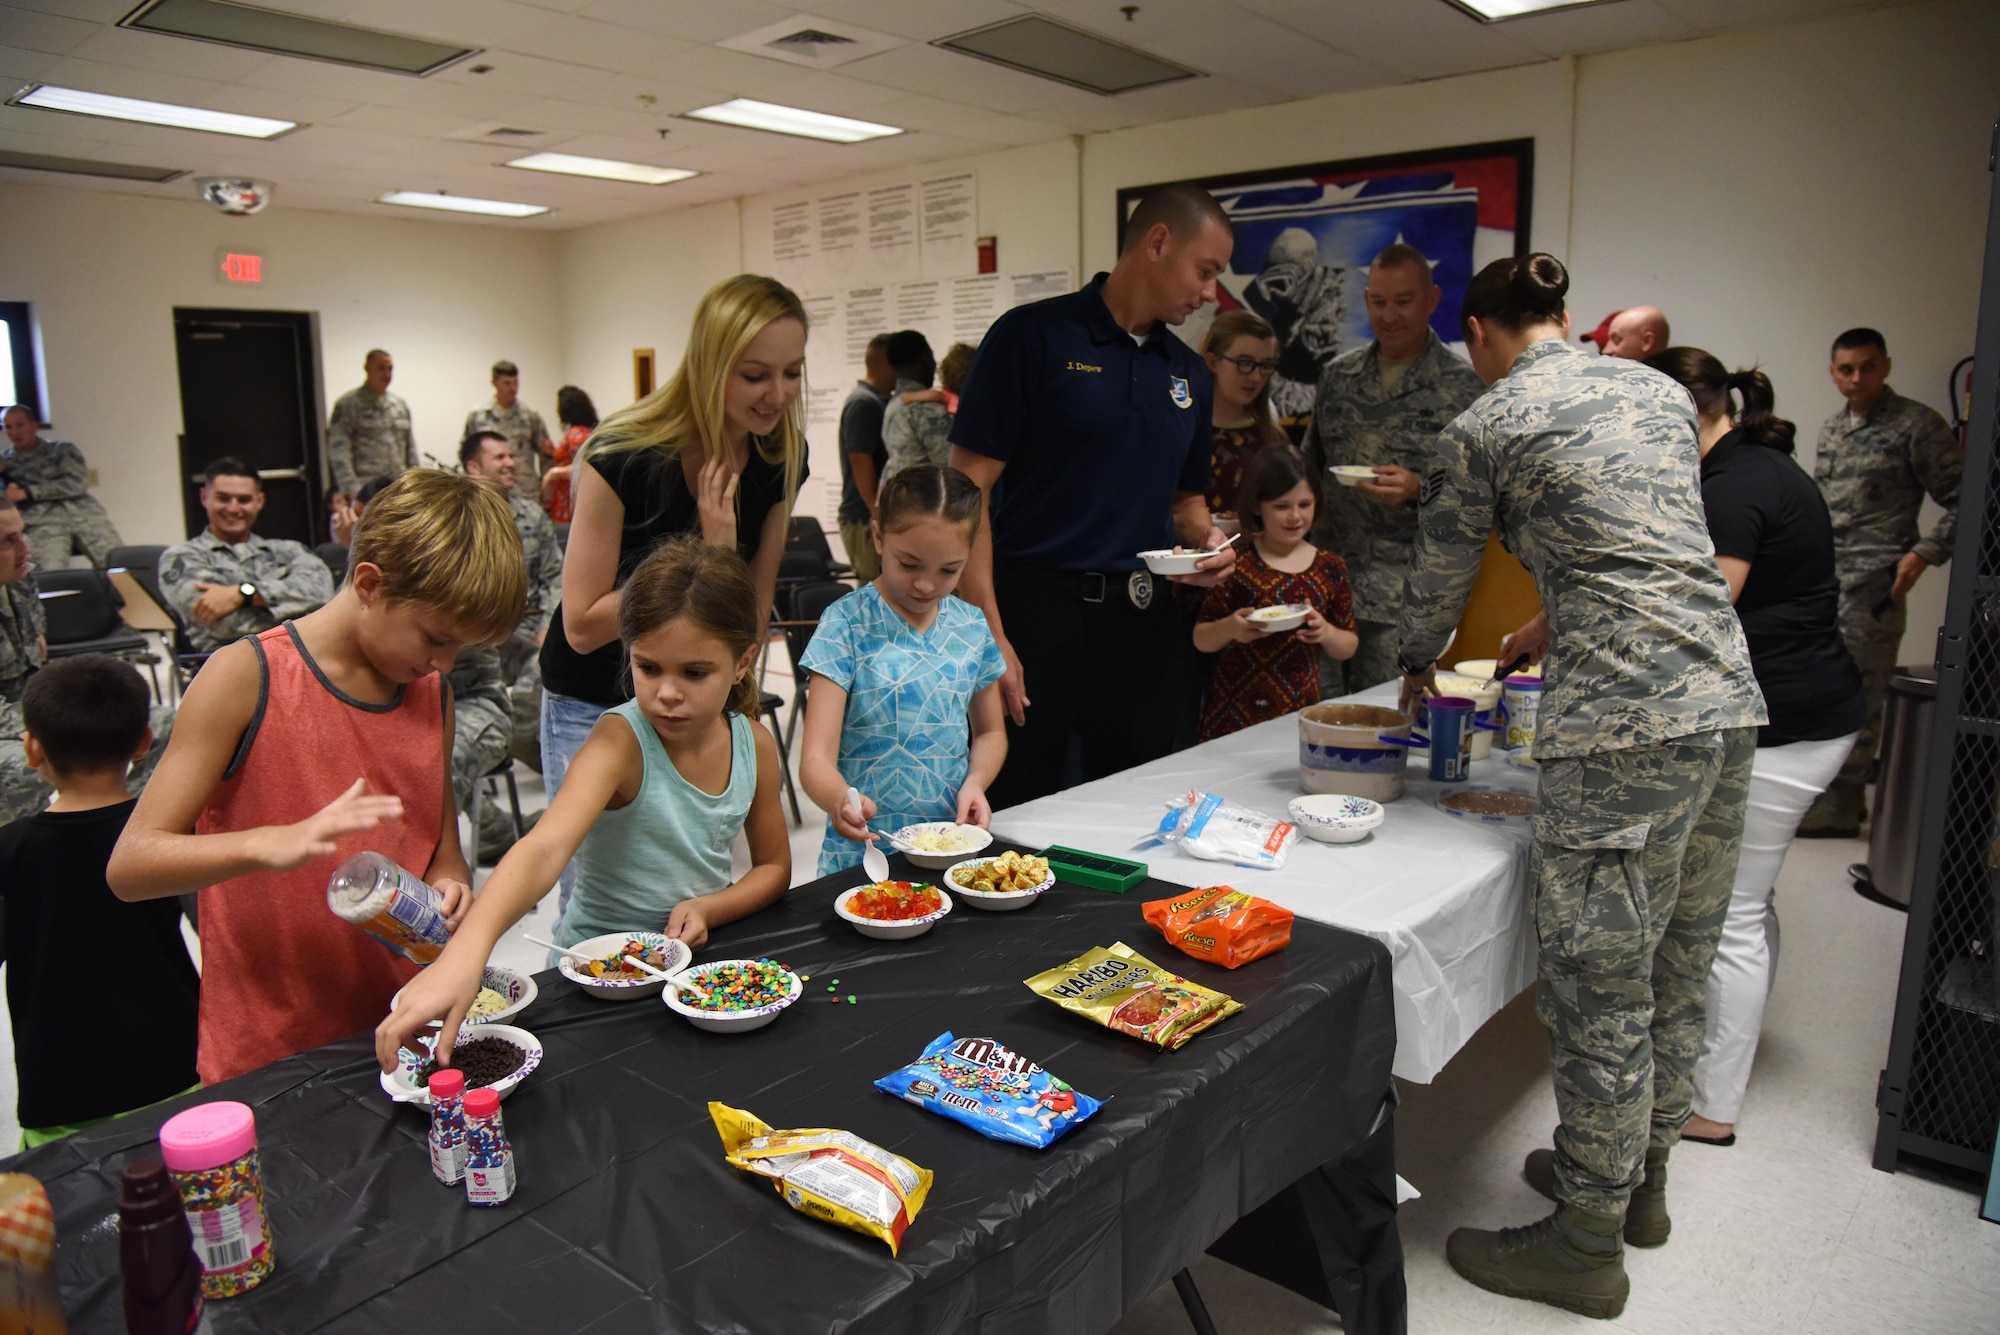 Personnel and family members from the 81st Security Forces Squadron make a bowl of ice cream during a family ice cream social at the 81st SFS building July 27, 2017, on Keesler Air Force Base, Miss. The event, hosted by the 81st SFS Defenders Council and Key Spouses, also consisted of a military working dog demonstration and a combat arms weapons display. (U.S. Air Force photo by Kemberly Groue)